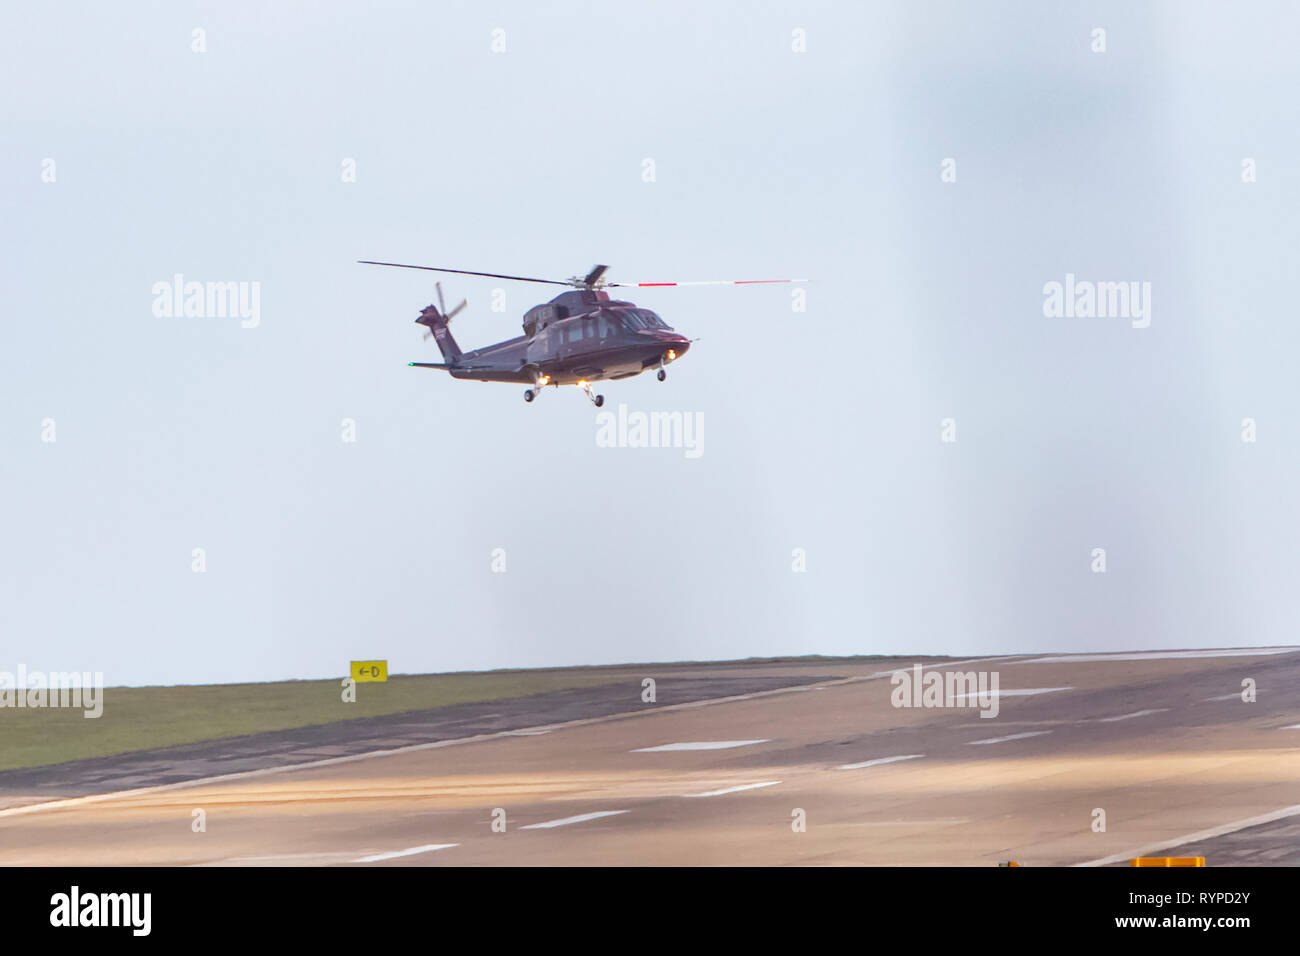 Leeds, UK. 14th Mar, 2019. The Queen's helicopter (registered G-XXEB) battled strong winds to land at Leeds Bradford Airport this afternoon. It is not known whether a member of the Royal Family was on board the helicopter but, according to the Royal Calendar, Prince Edward is carrying out official engagements in West Yorkshire today. Credit: James Copeland/Alamy Live News Stock Photo